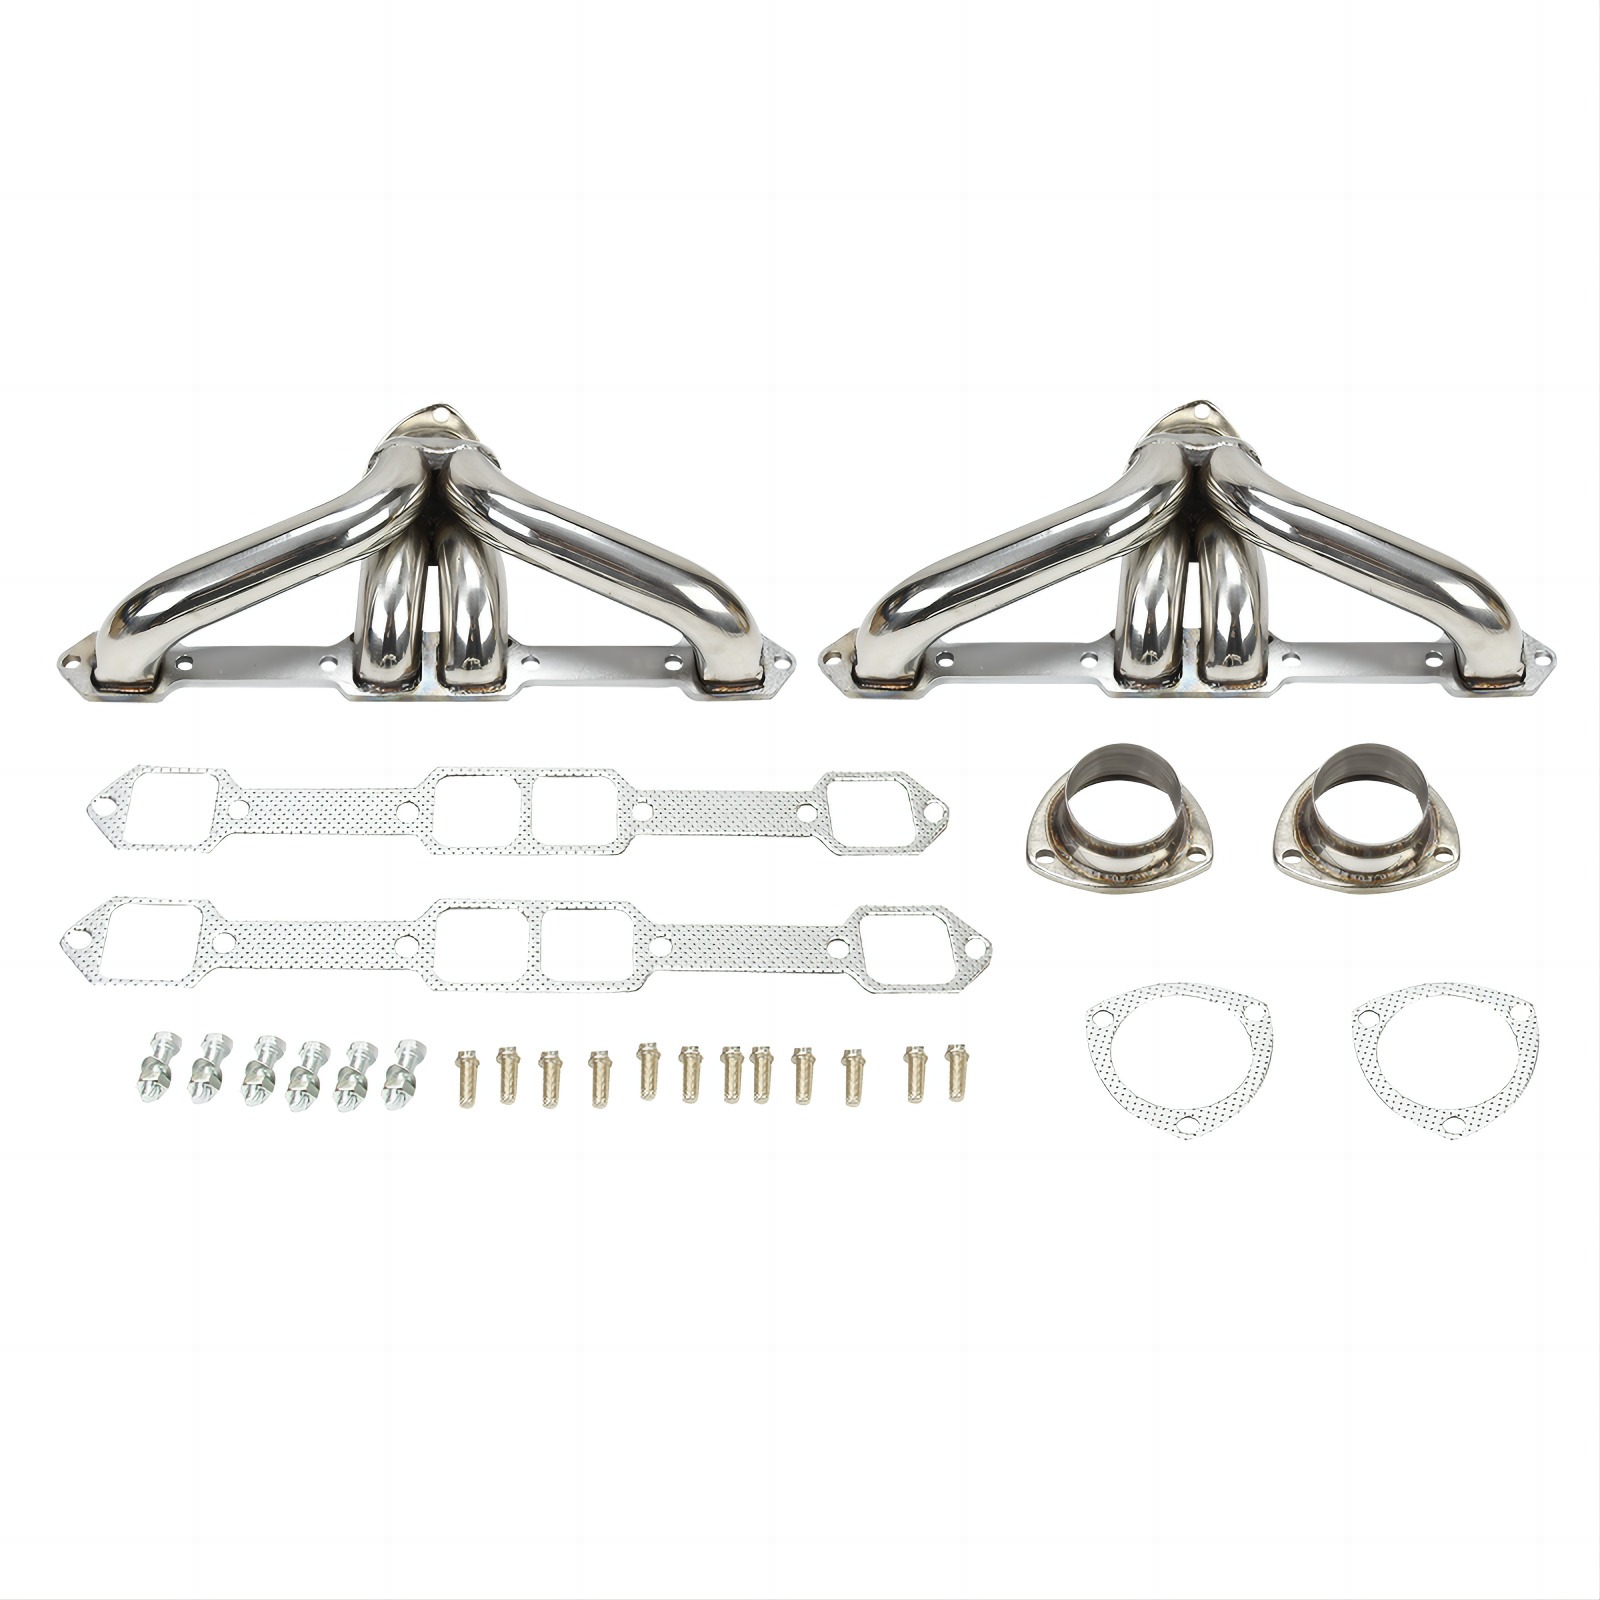 🔥Shorty Exhaust Headers Fits Dodge Chrysler Plymouth Big Block 1959-1978 373440